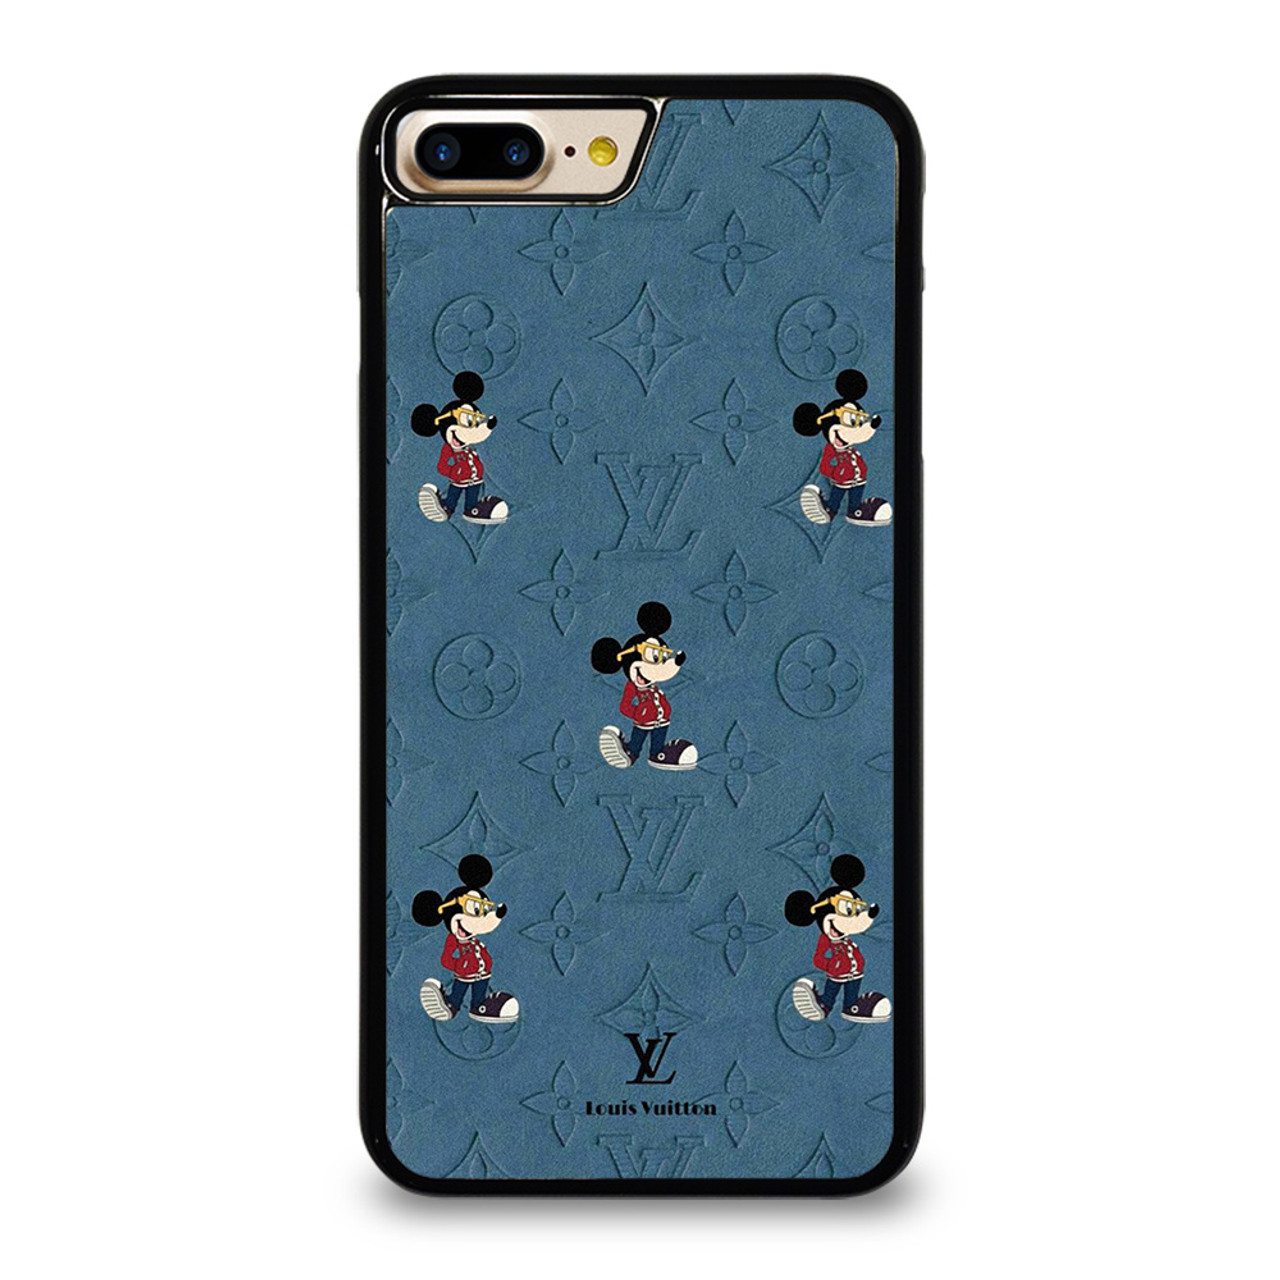 LOUIS VUITTON MICKEY MOUSE iPhone 7 / 8 Plus Case Cover